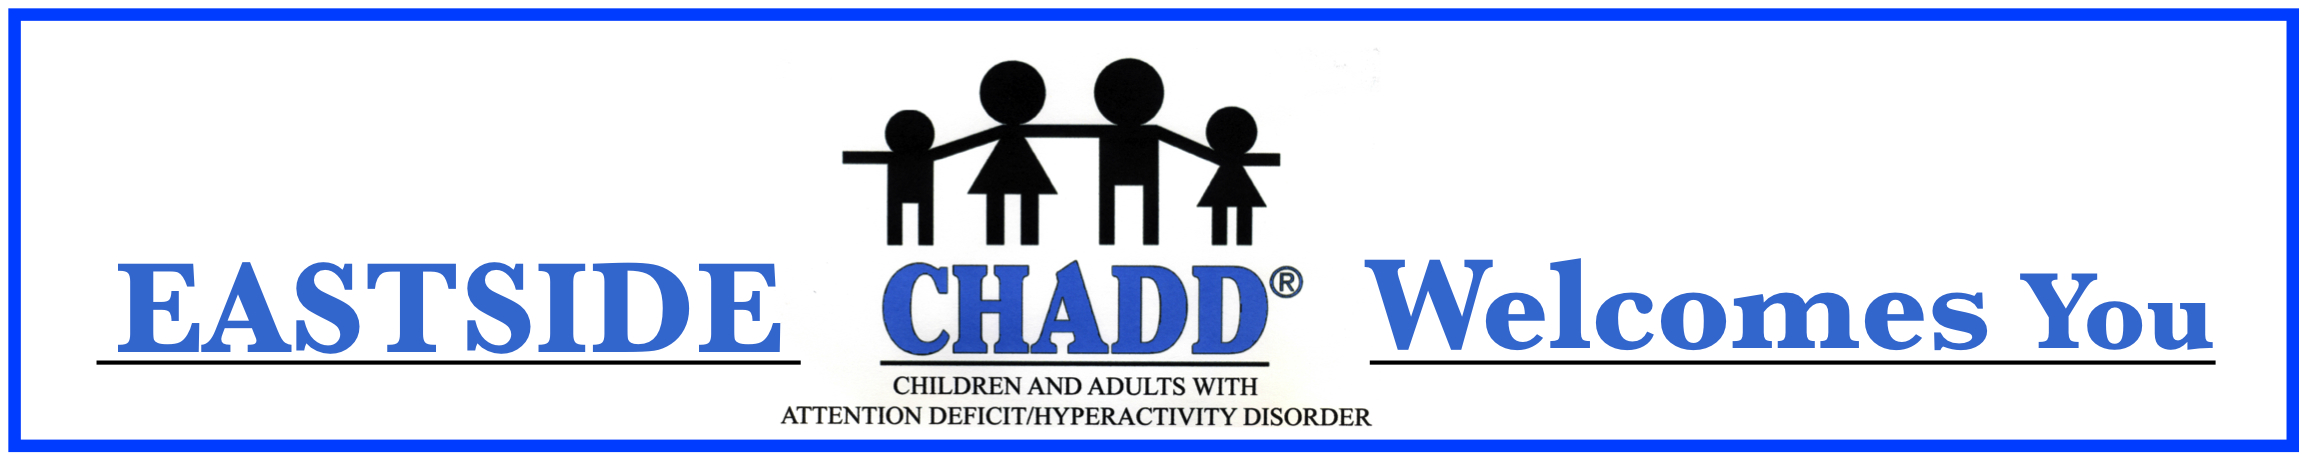 Eastside CHADD (Children and Adults with Attention Deficit-Hyperactivity
           Disorder)